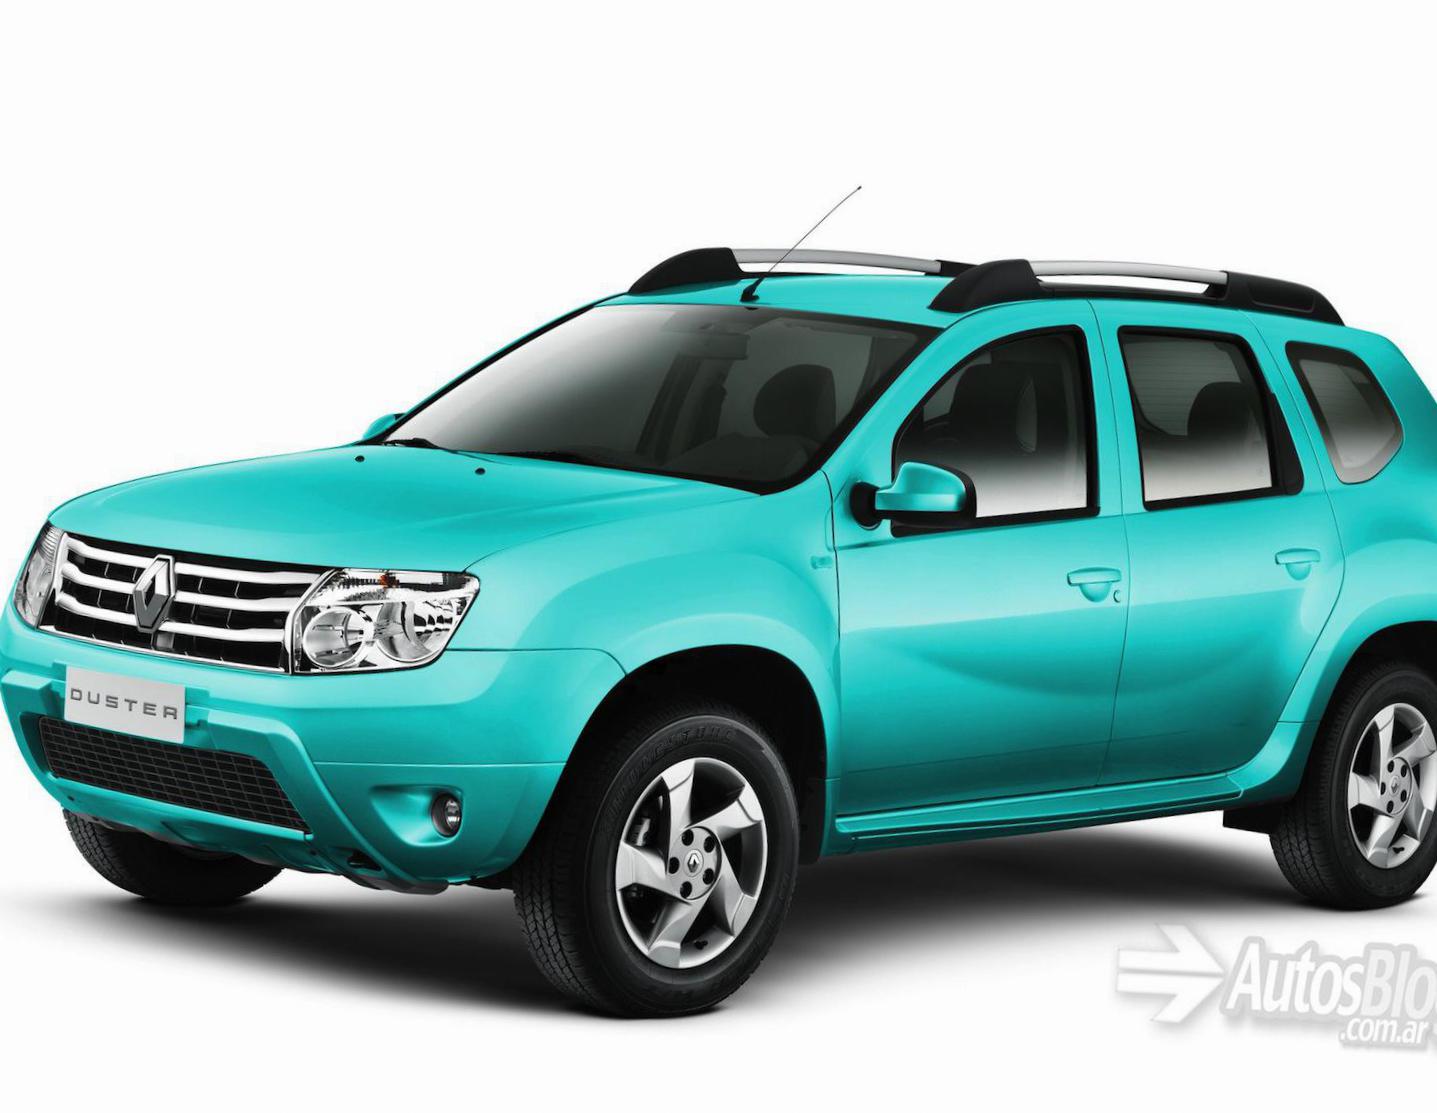 Renault Duster how mach 2010